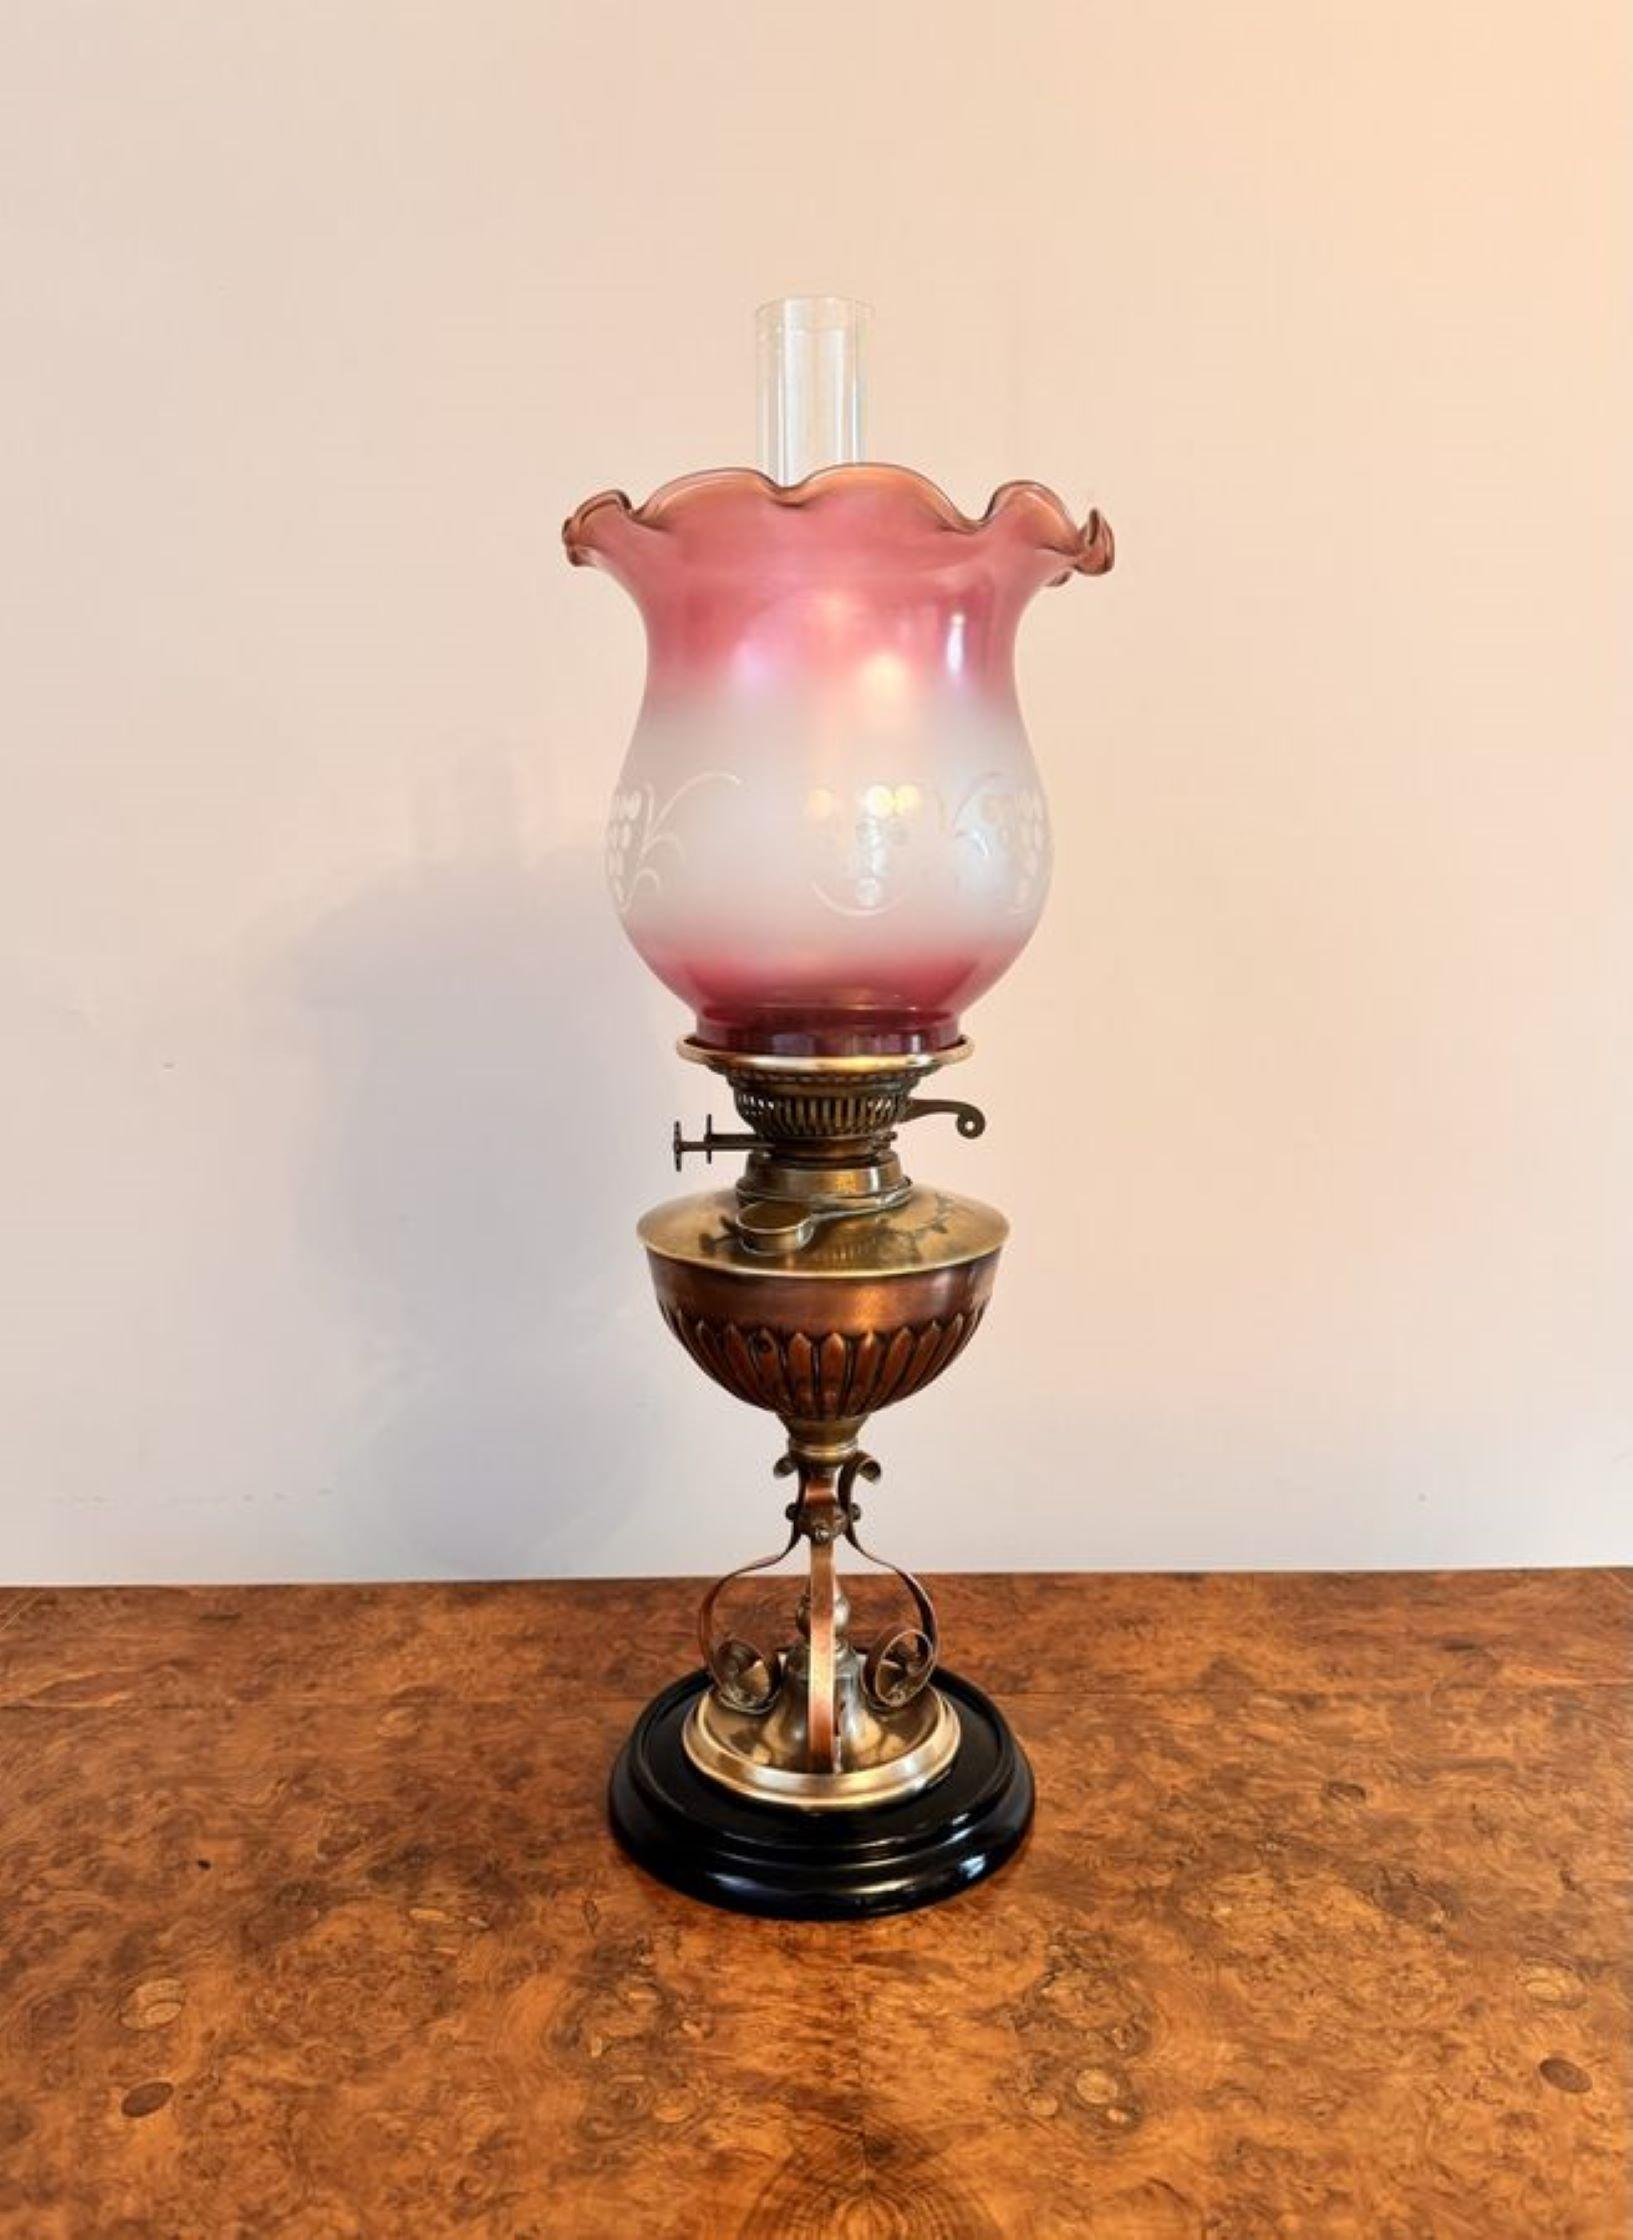 Stunning quality antique arts and crafts brass and copper oil lamp, having the original quality pink glass shade with a wavy shaped edge, a glass chimney, a brass burner, supported by a brass and copper column, raised on a circular base.

D. 1900